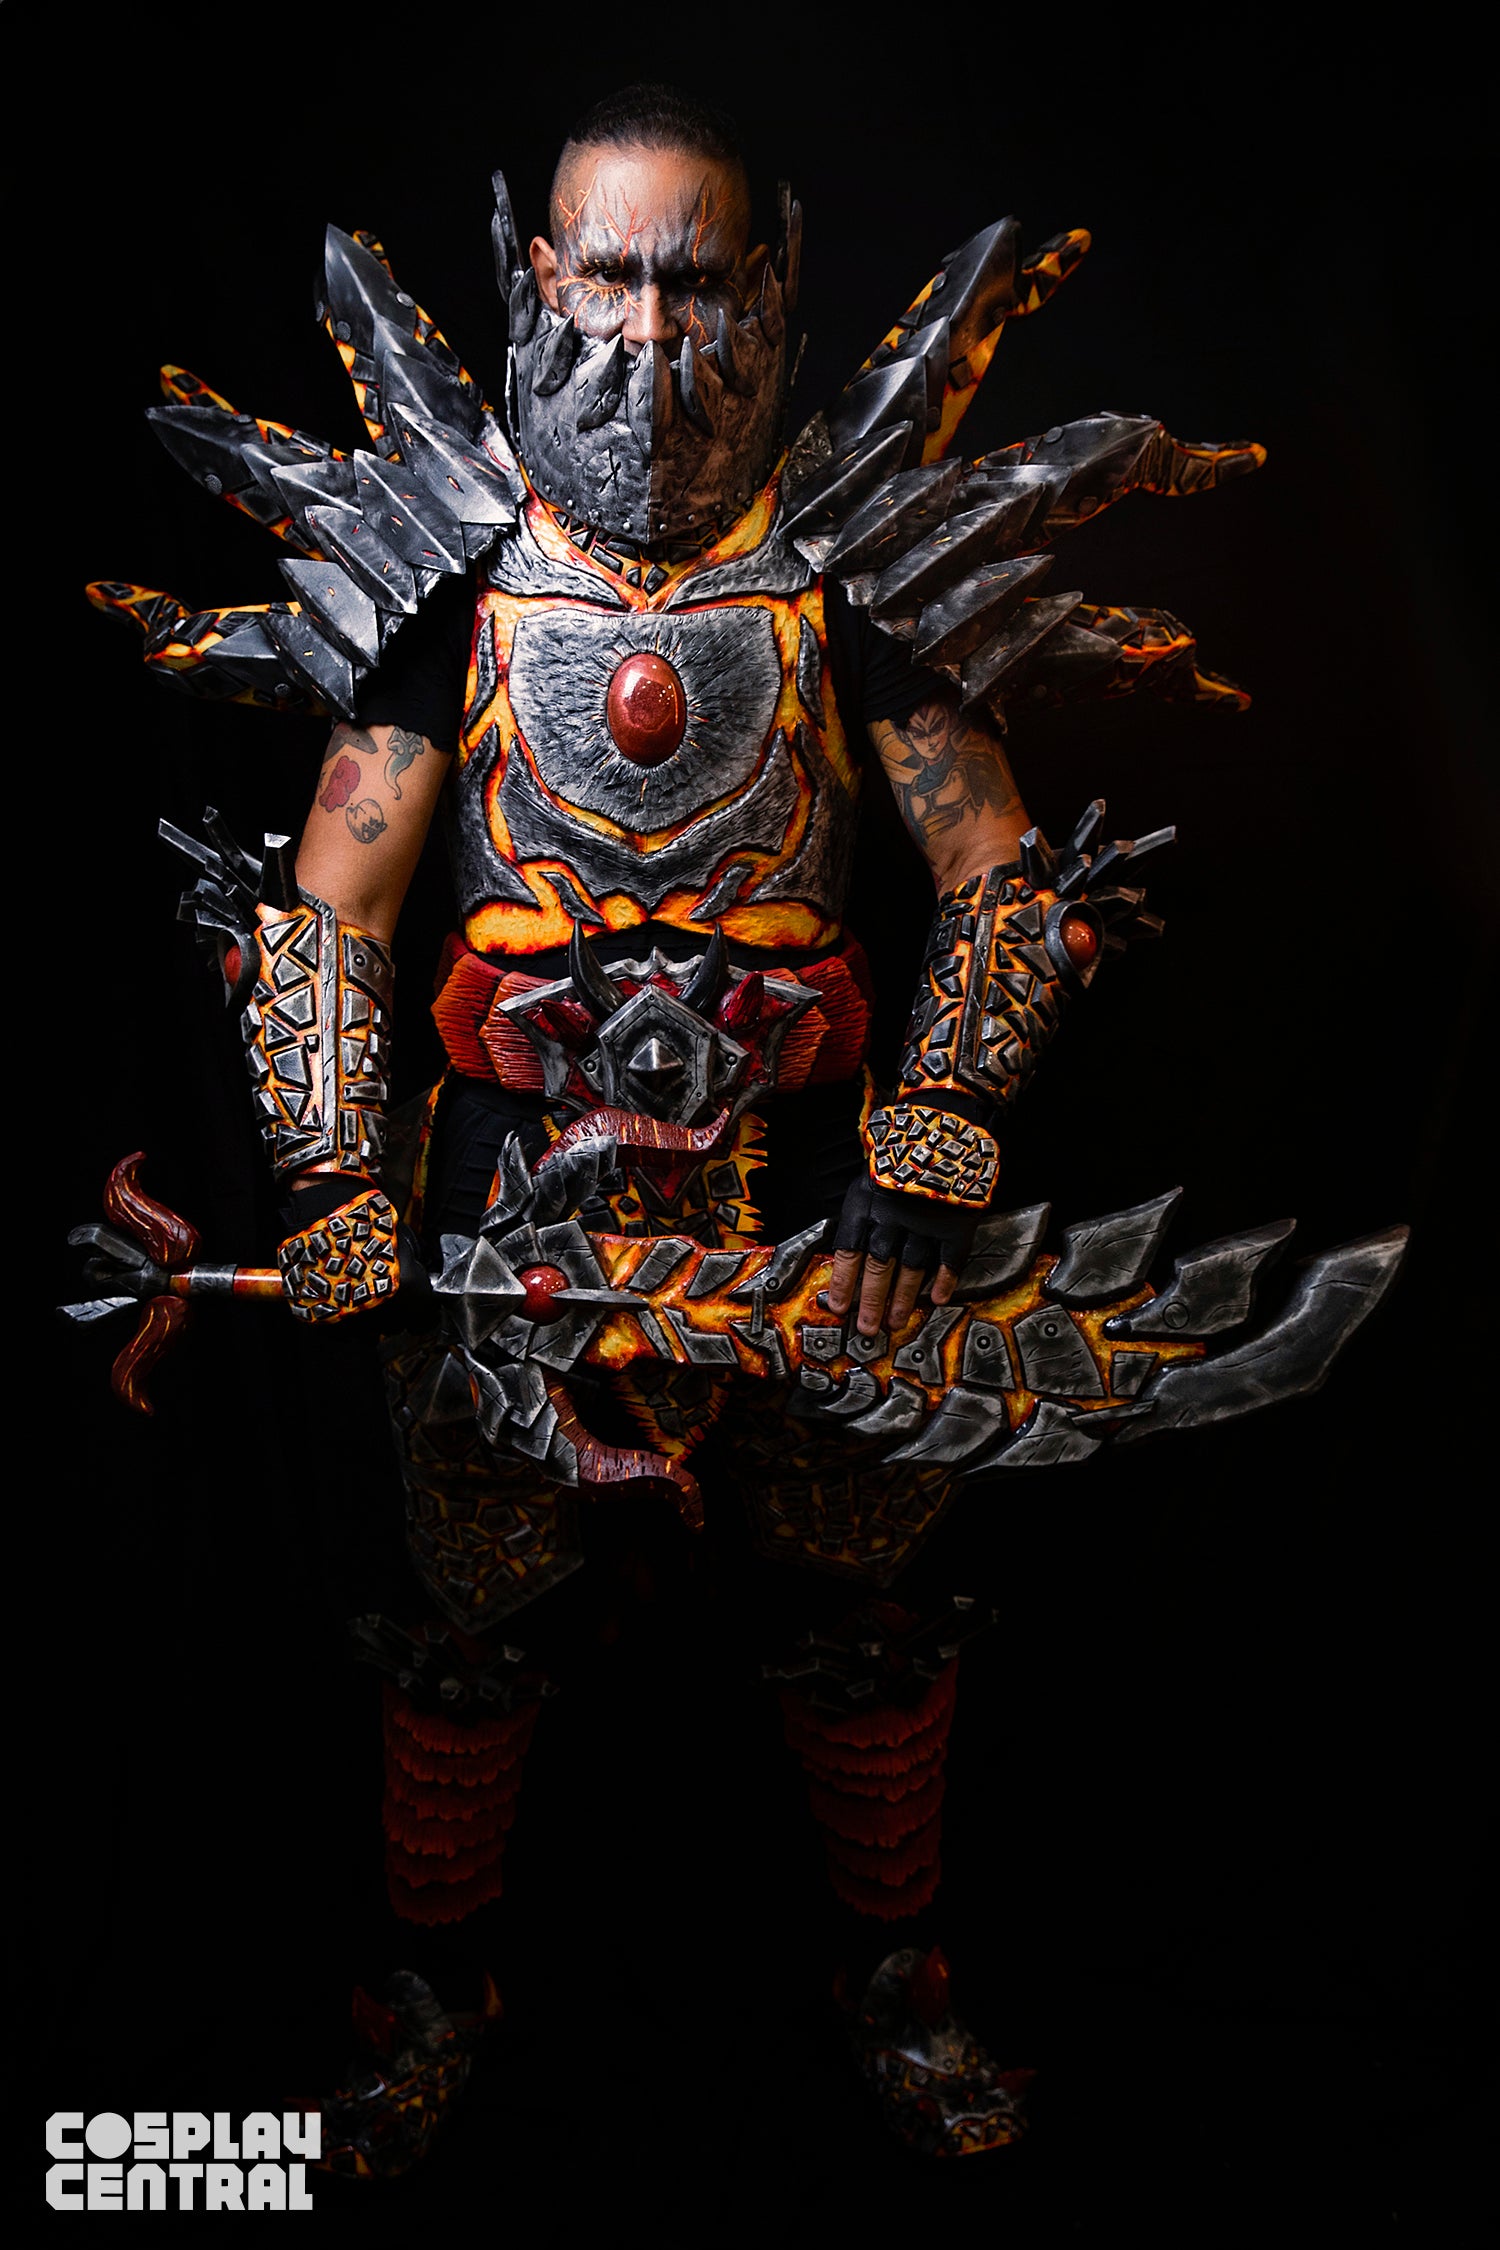 Warheart Cosplay as Deathwing from World of Warcraft